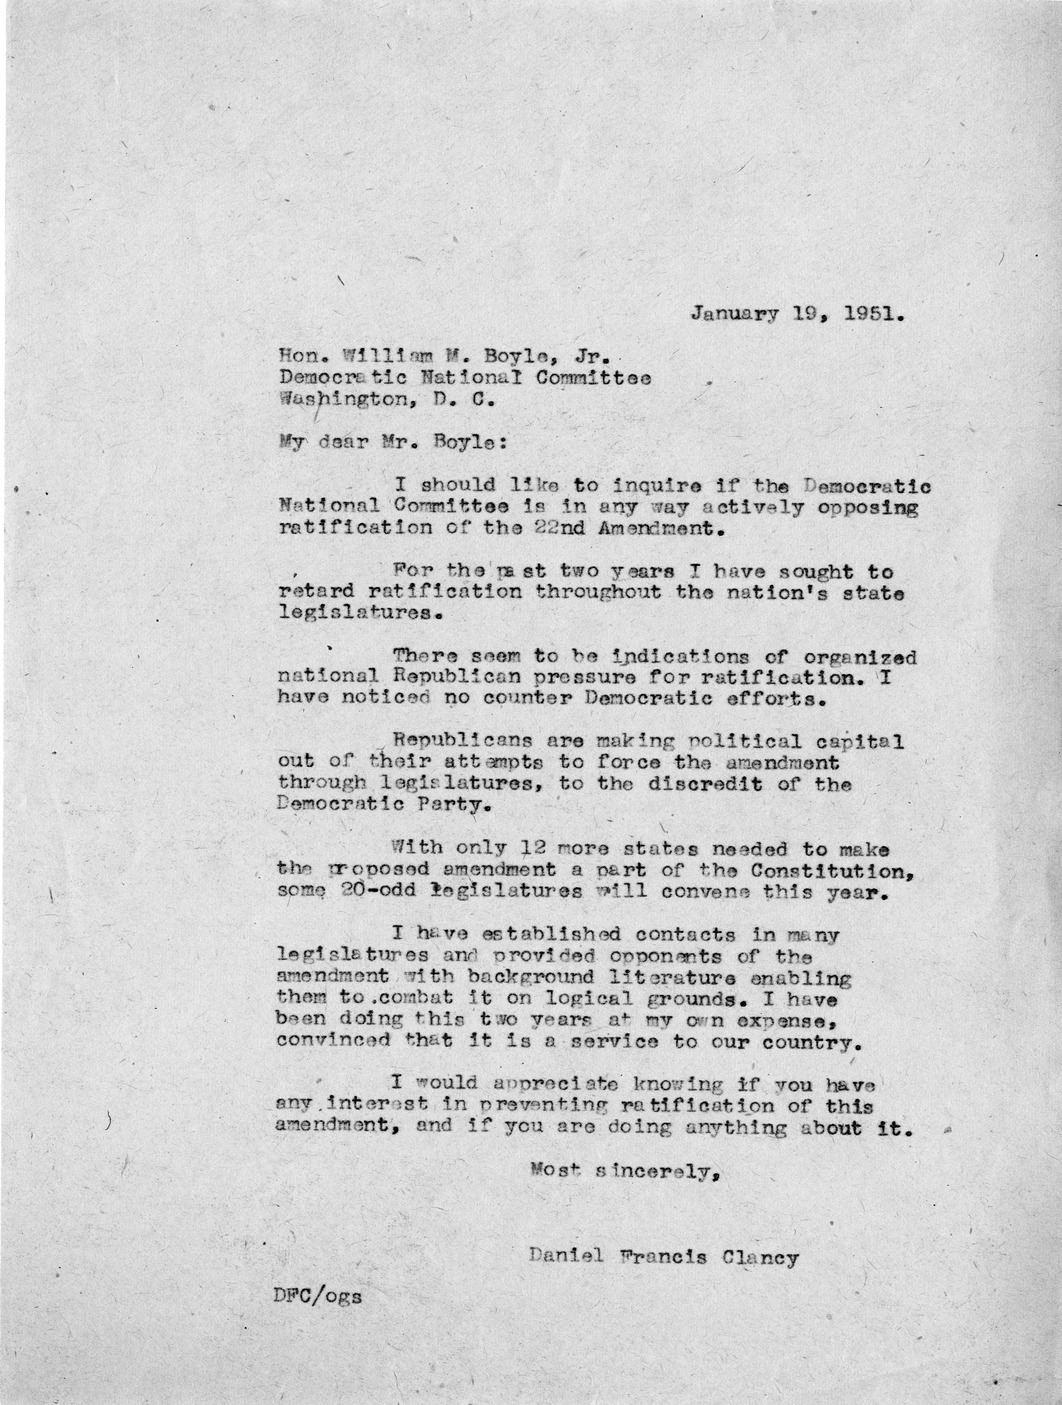 Letter from Daniel F. Clancy to William M. Boyle, Jr.